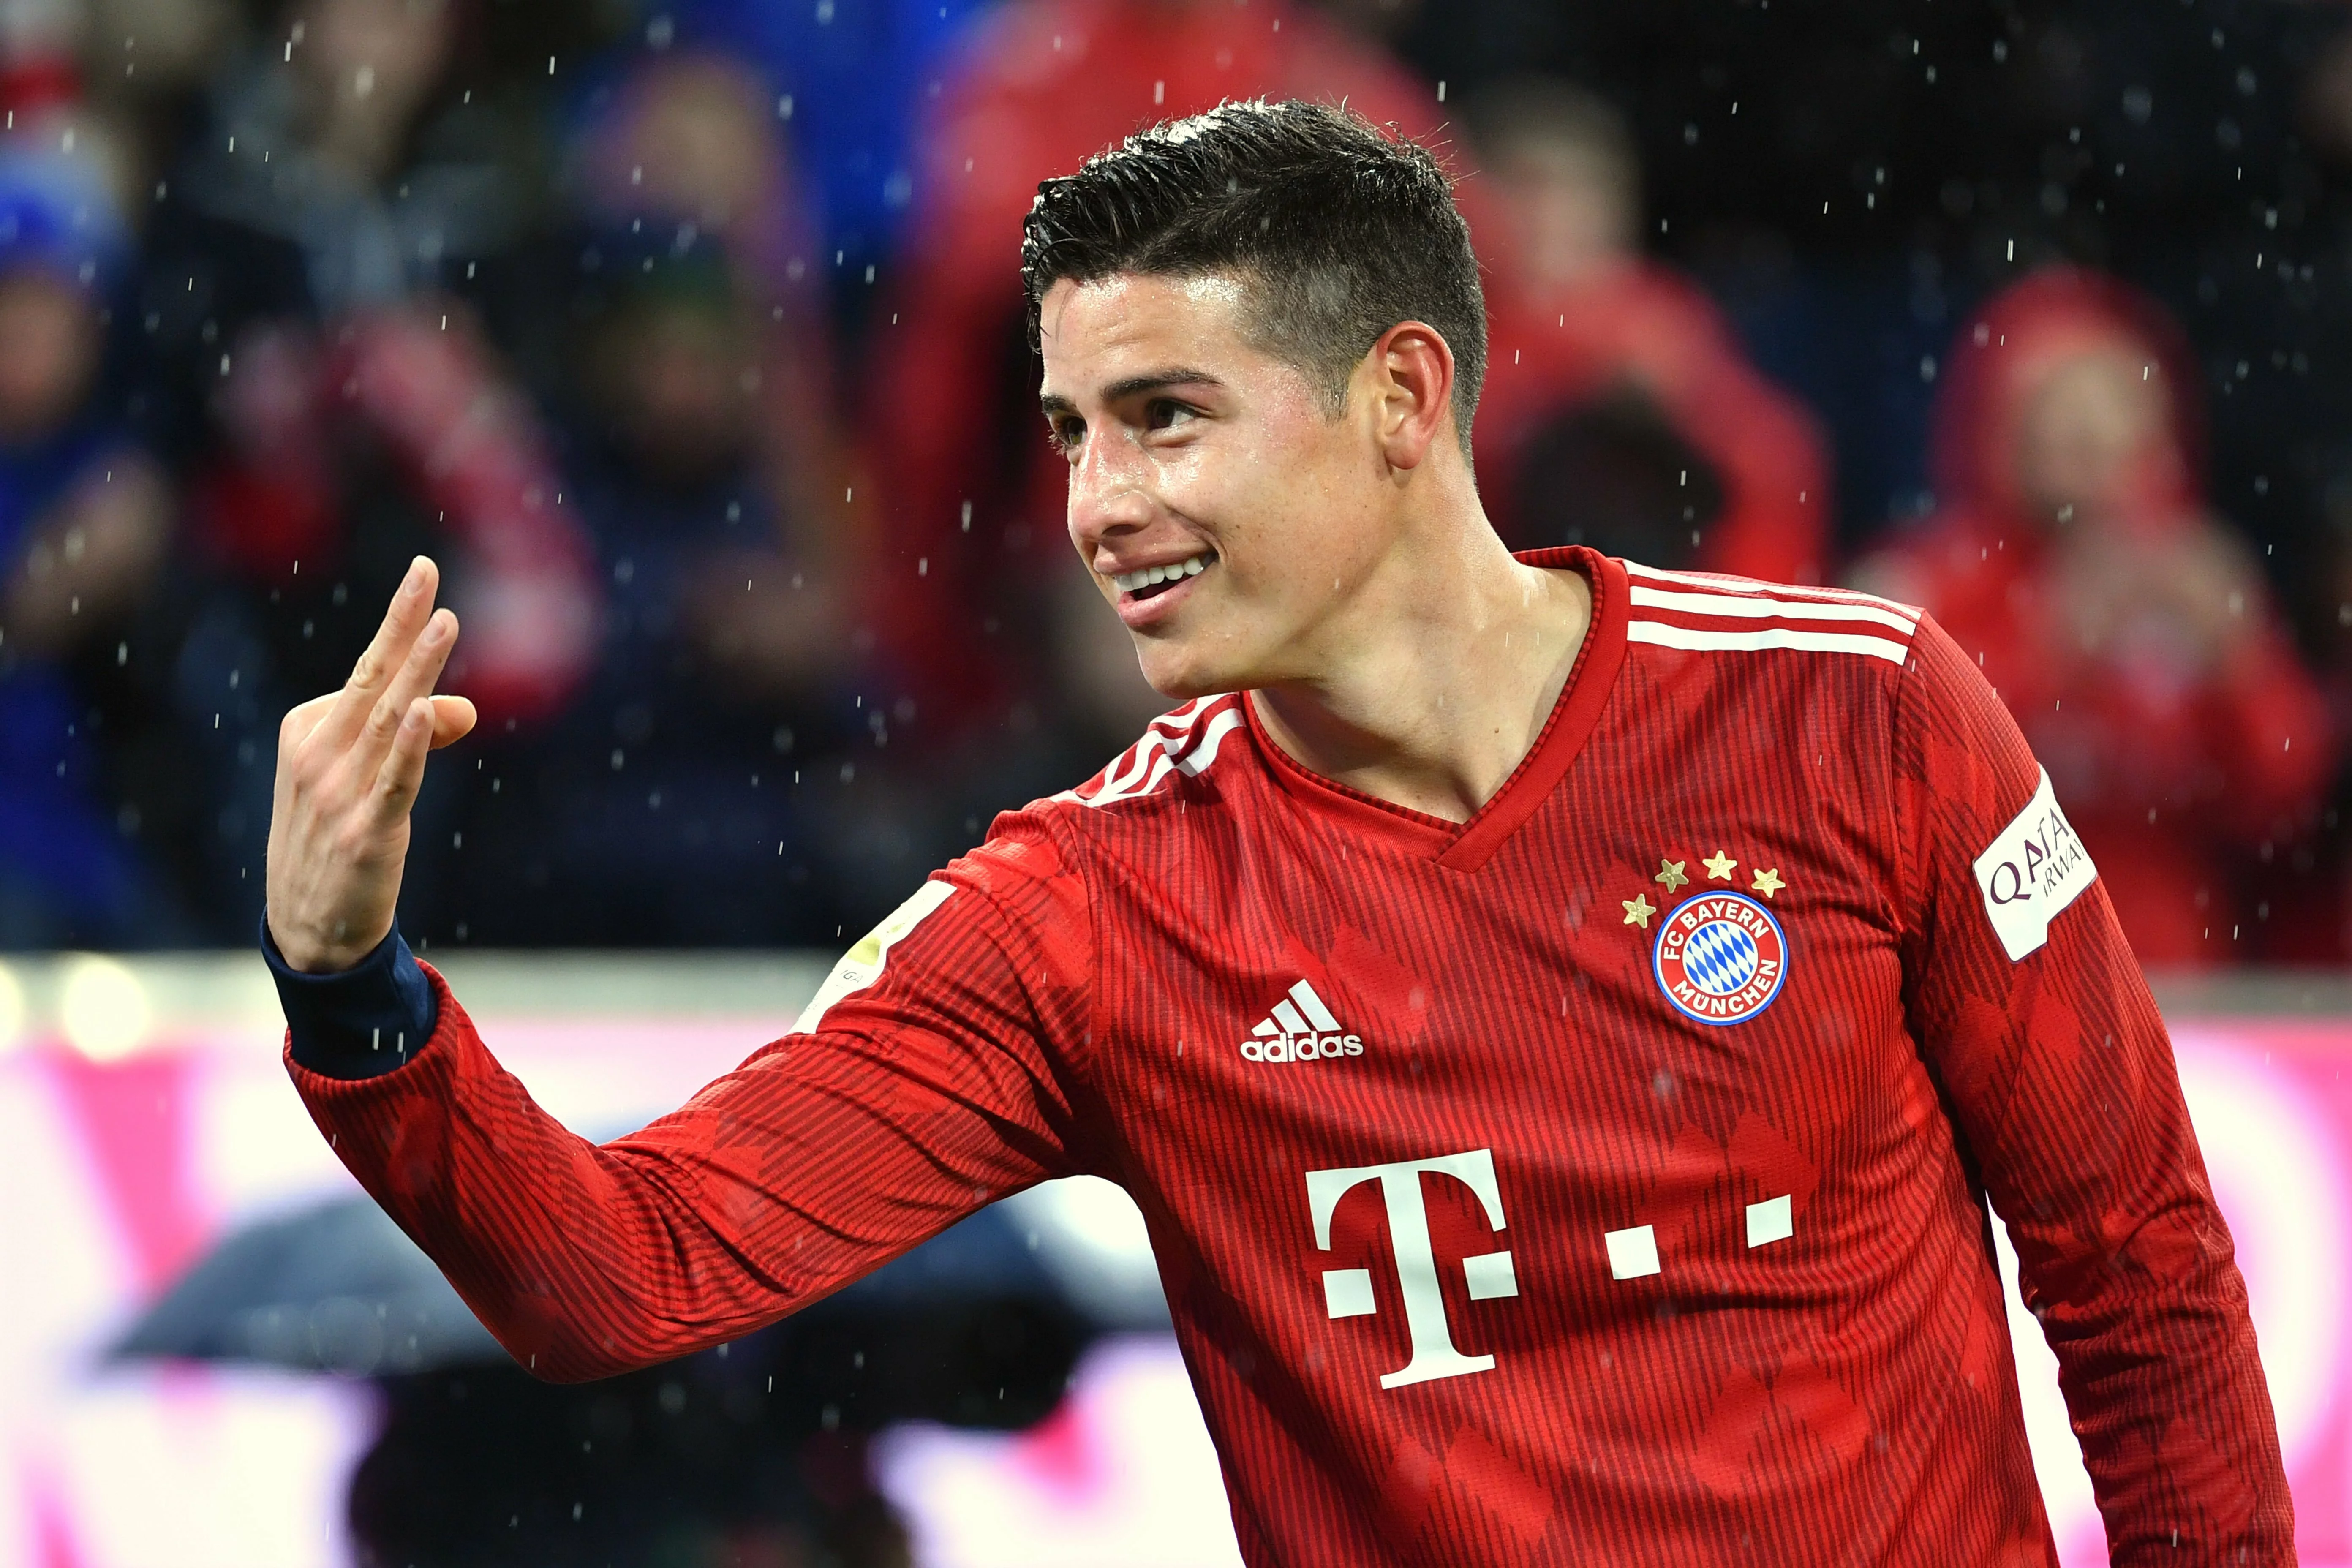 Bayern Board Approve €200m Transfers, With Two Deals Already Completed - FootyNews.co.uk